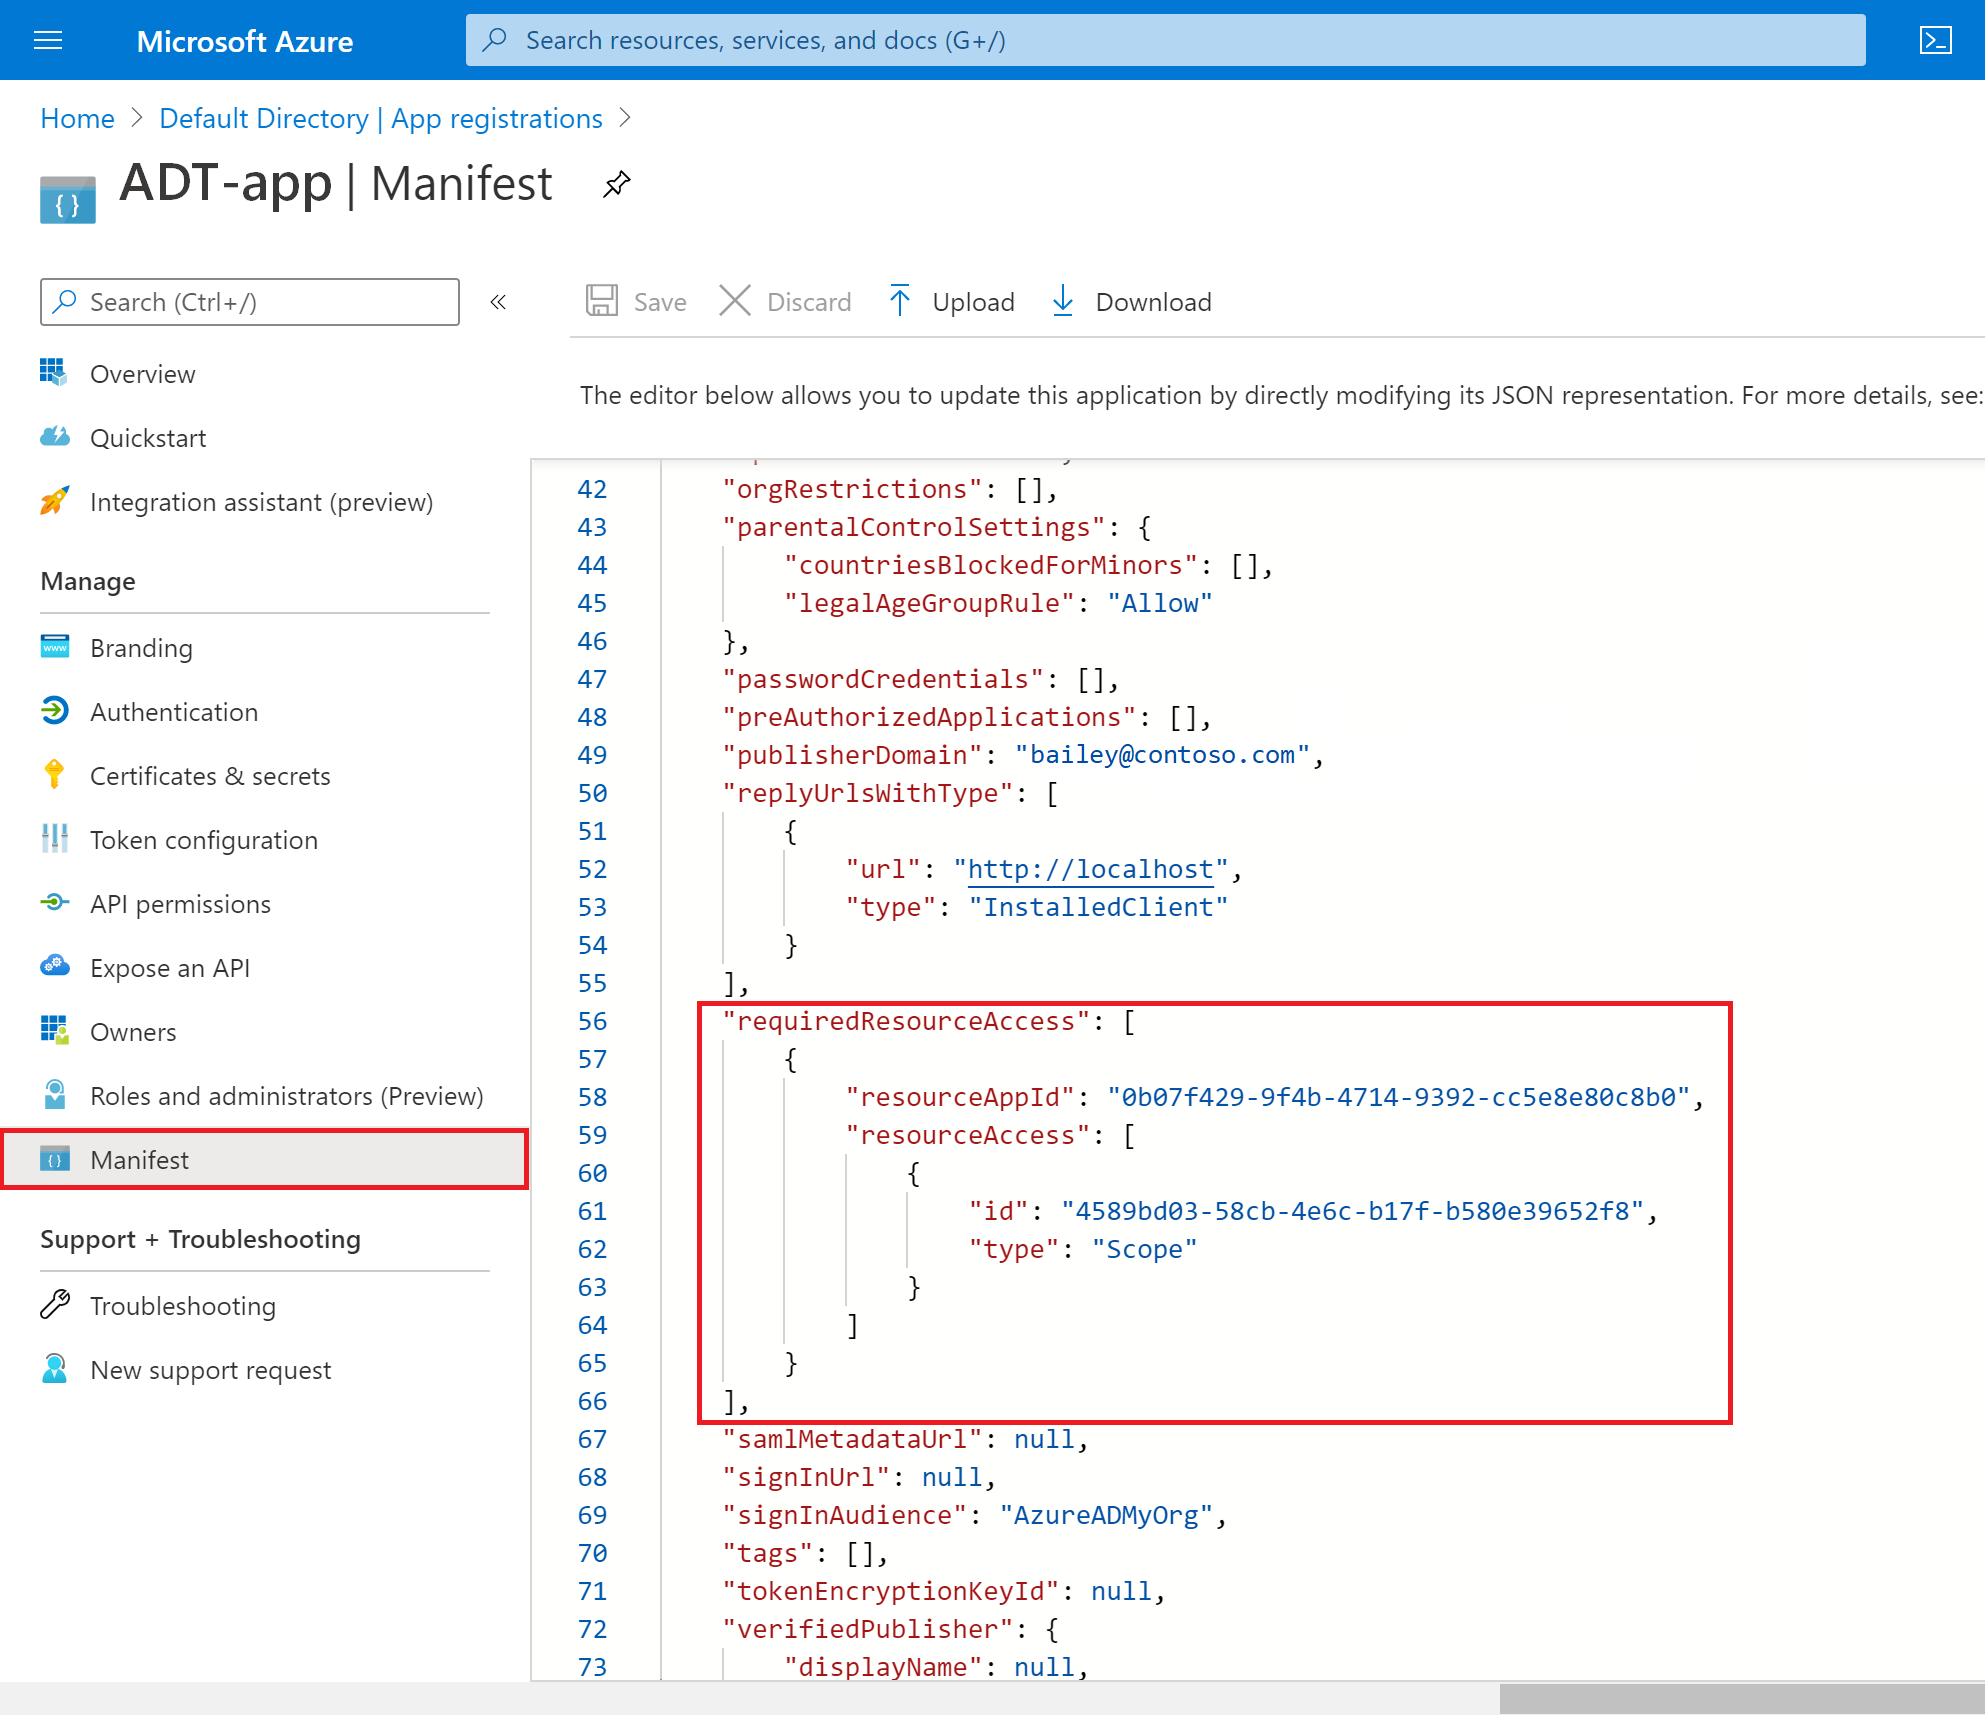 Screenshot of the manifest for the Microsoft Entra app registration in the Azure portal.